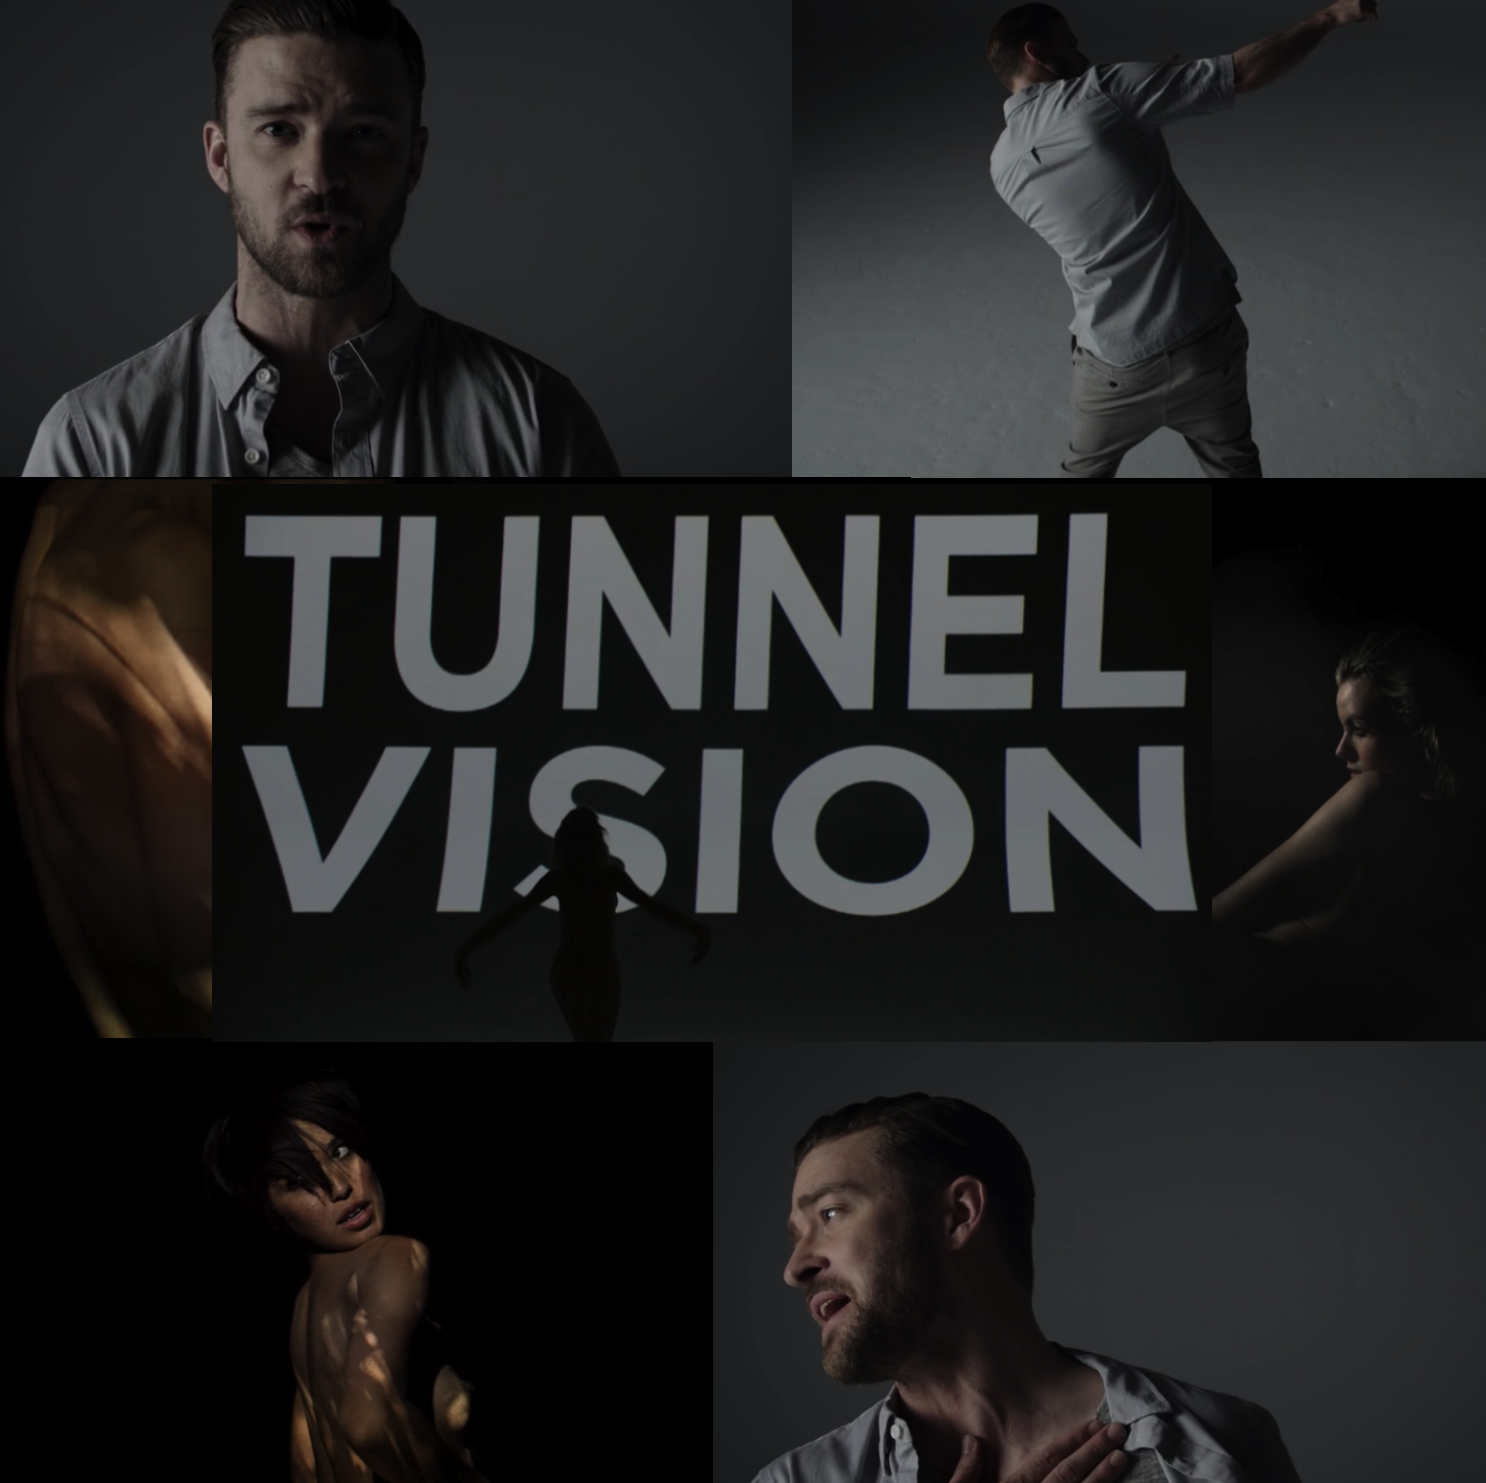 Justin Timberlakes Tunnel Vision Returns to YouTube after 